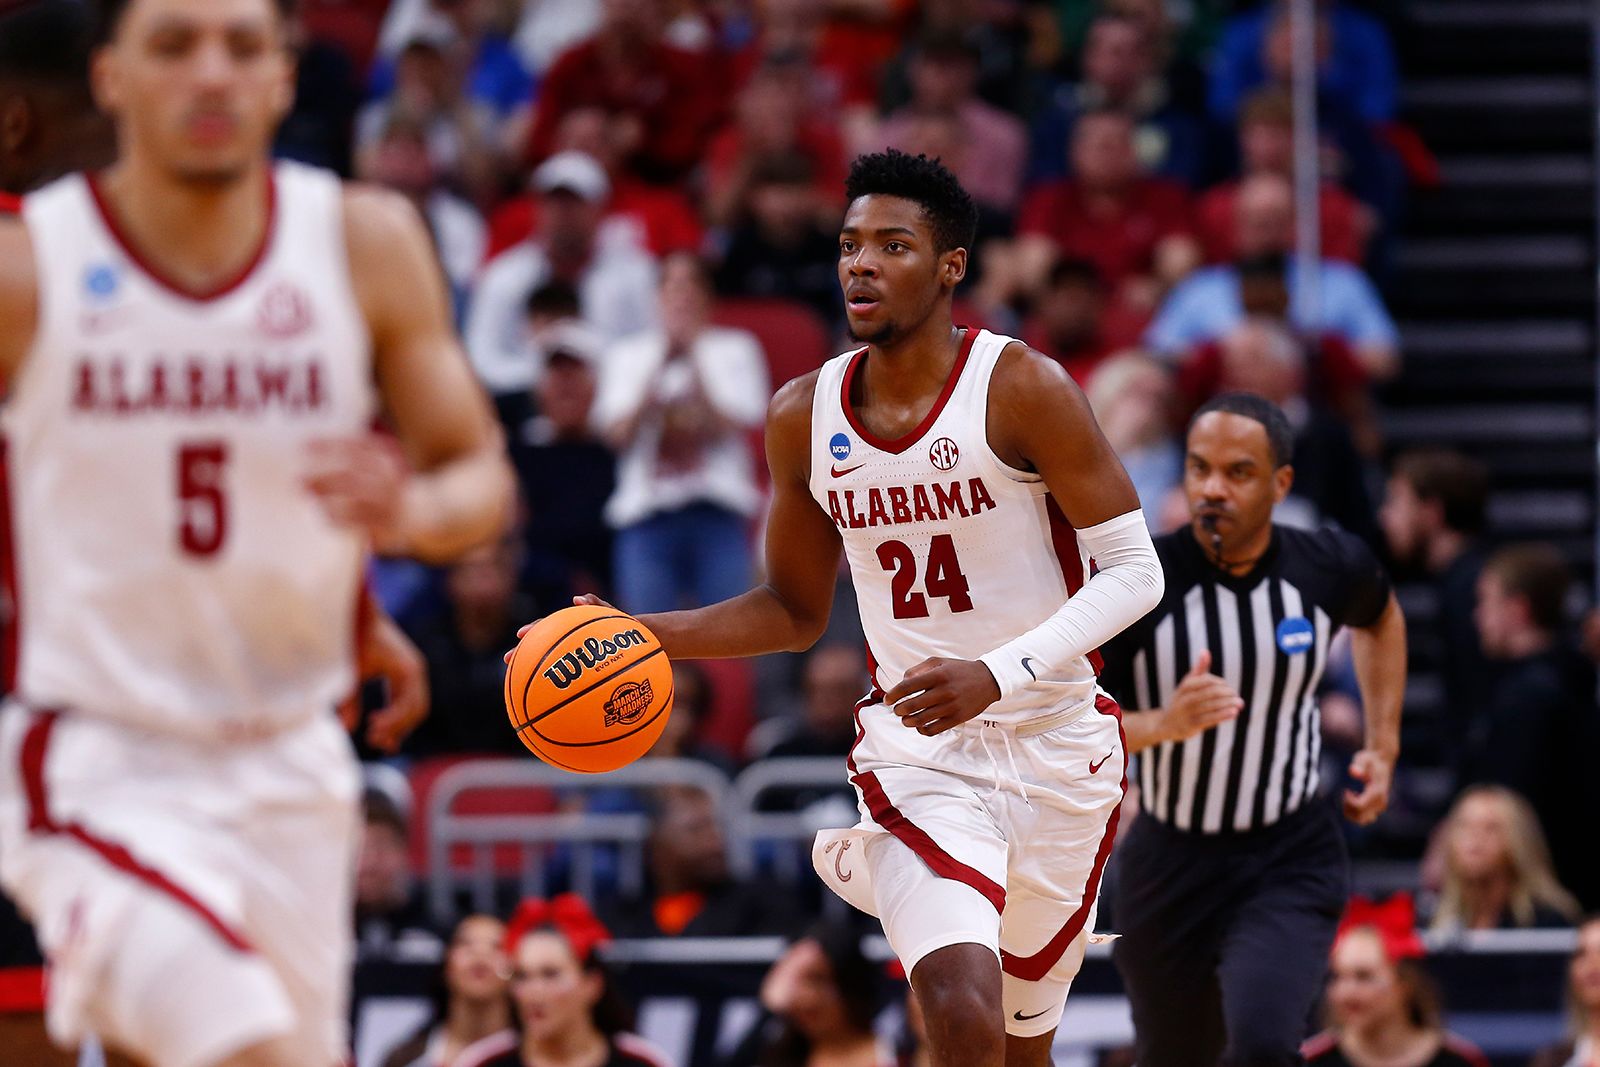 Alabama's Brandon Miller tops list of NBA prospects at March Madness